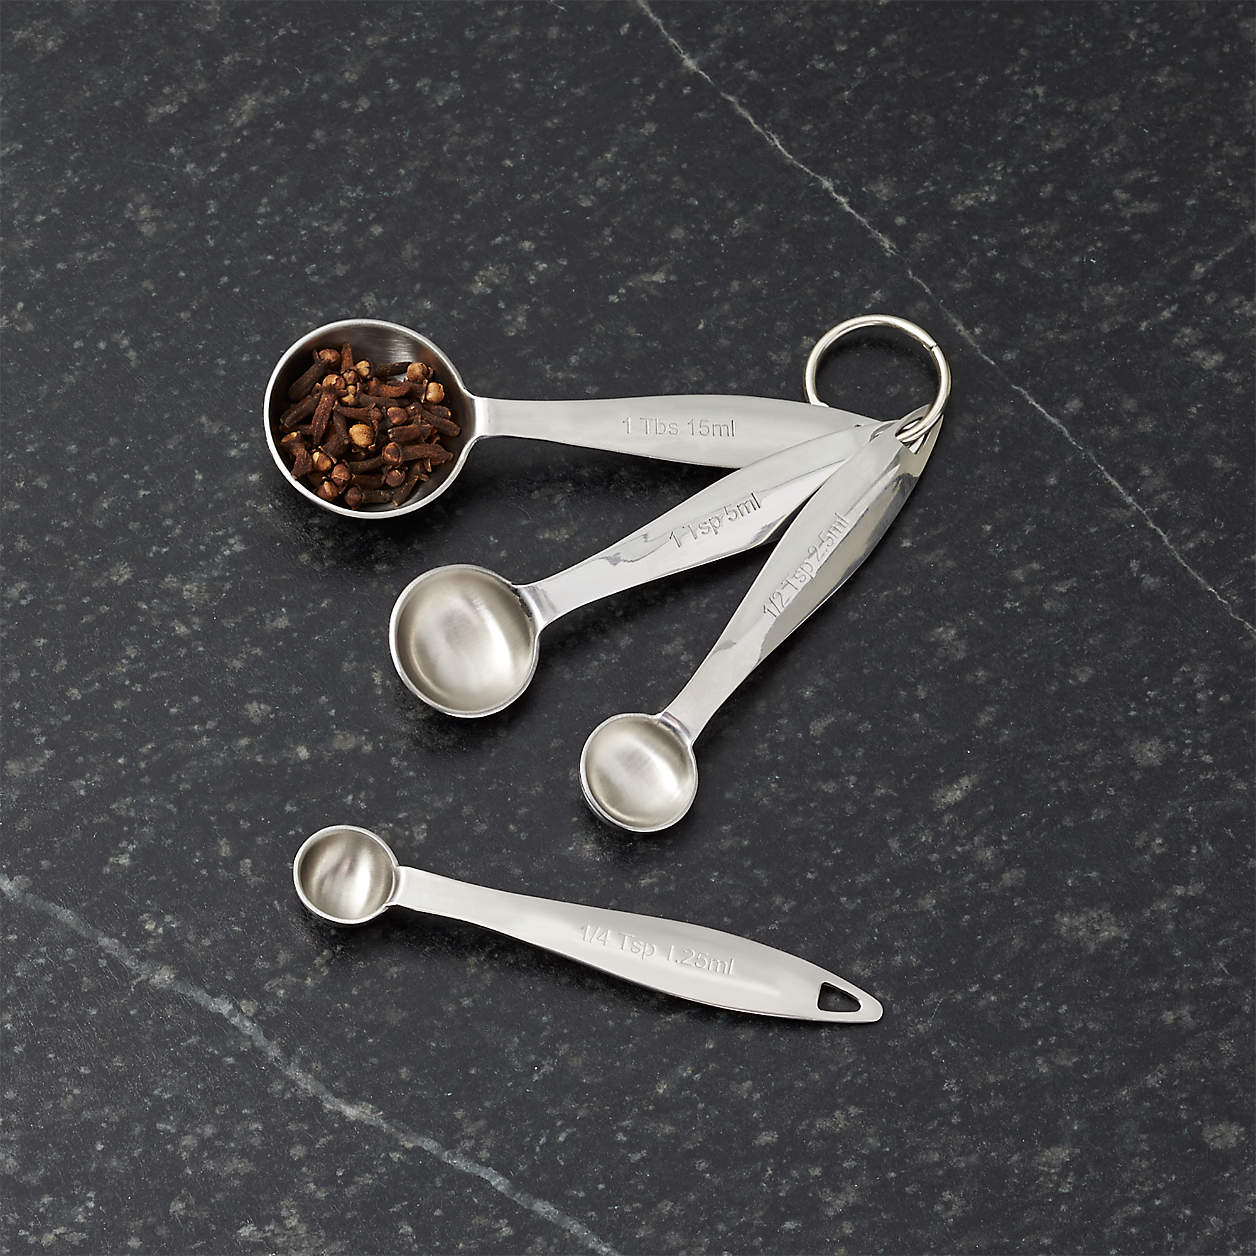 Crate & Barrel Stainless Steel Measuring Spoons, Set of 4